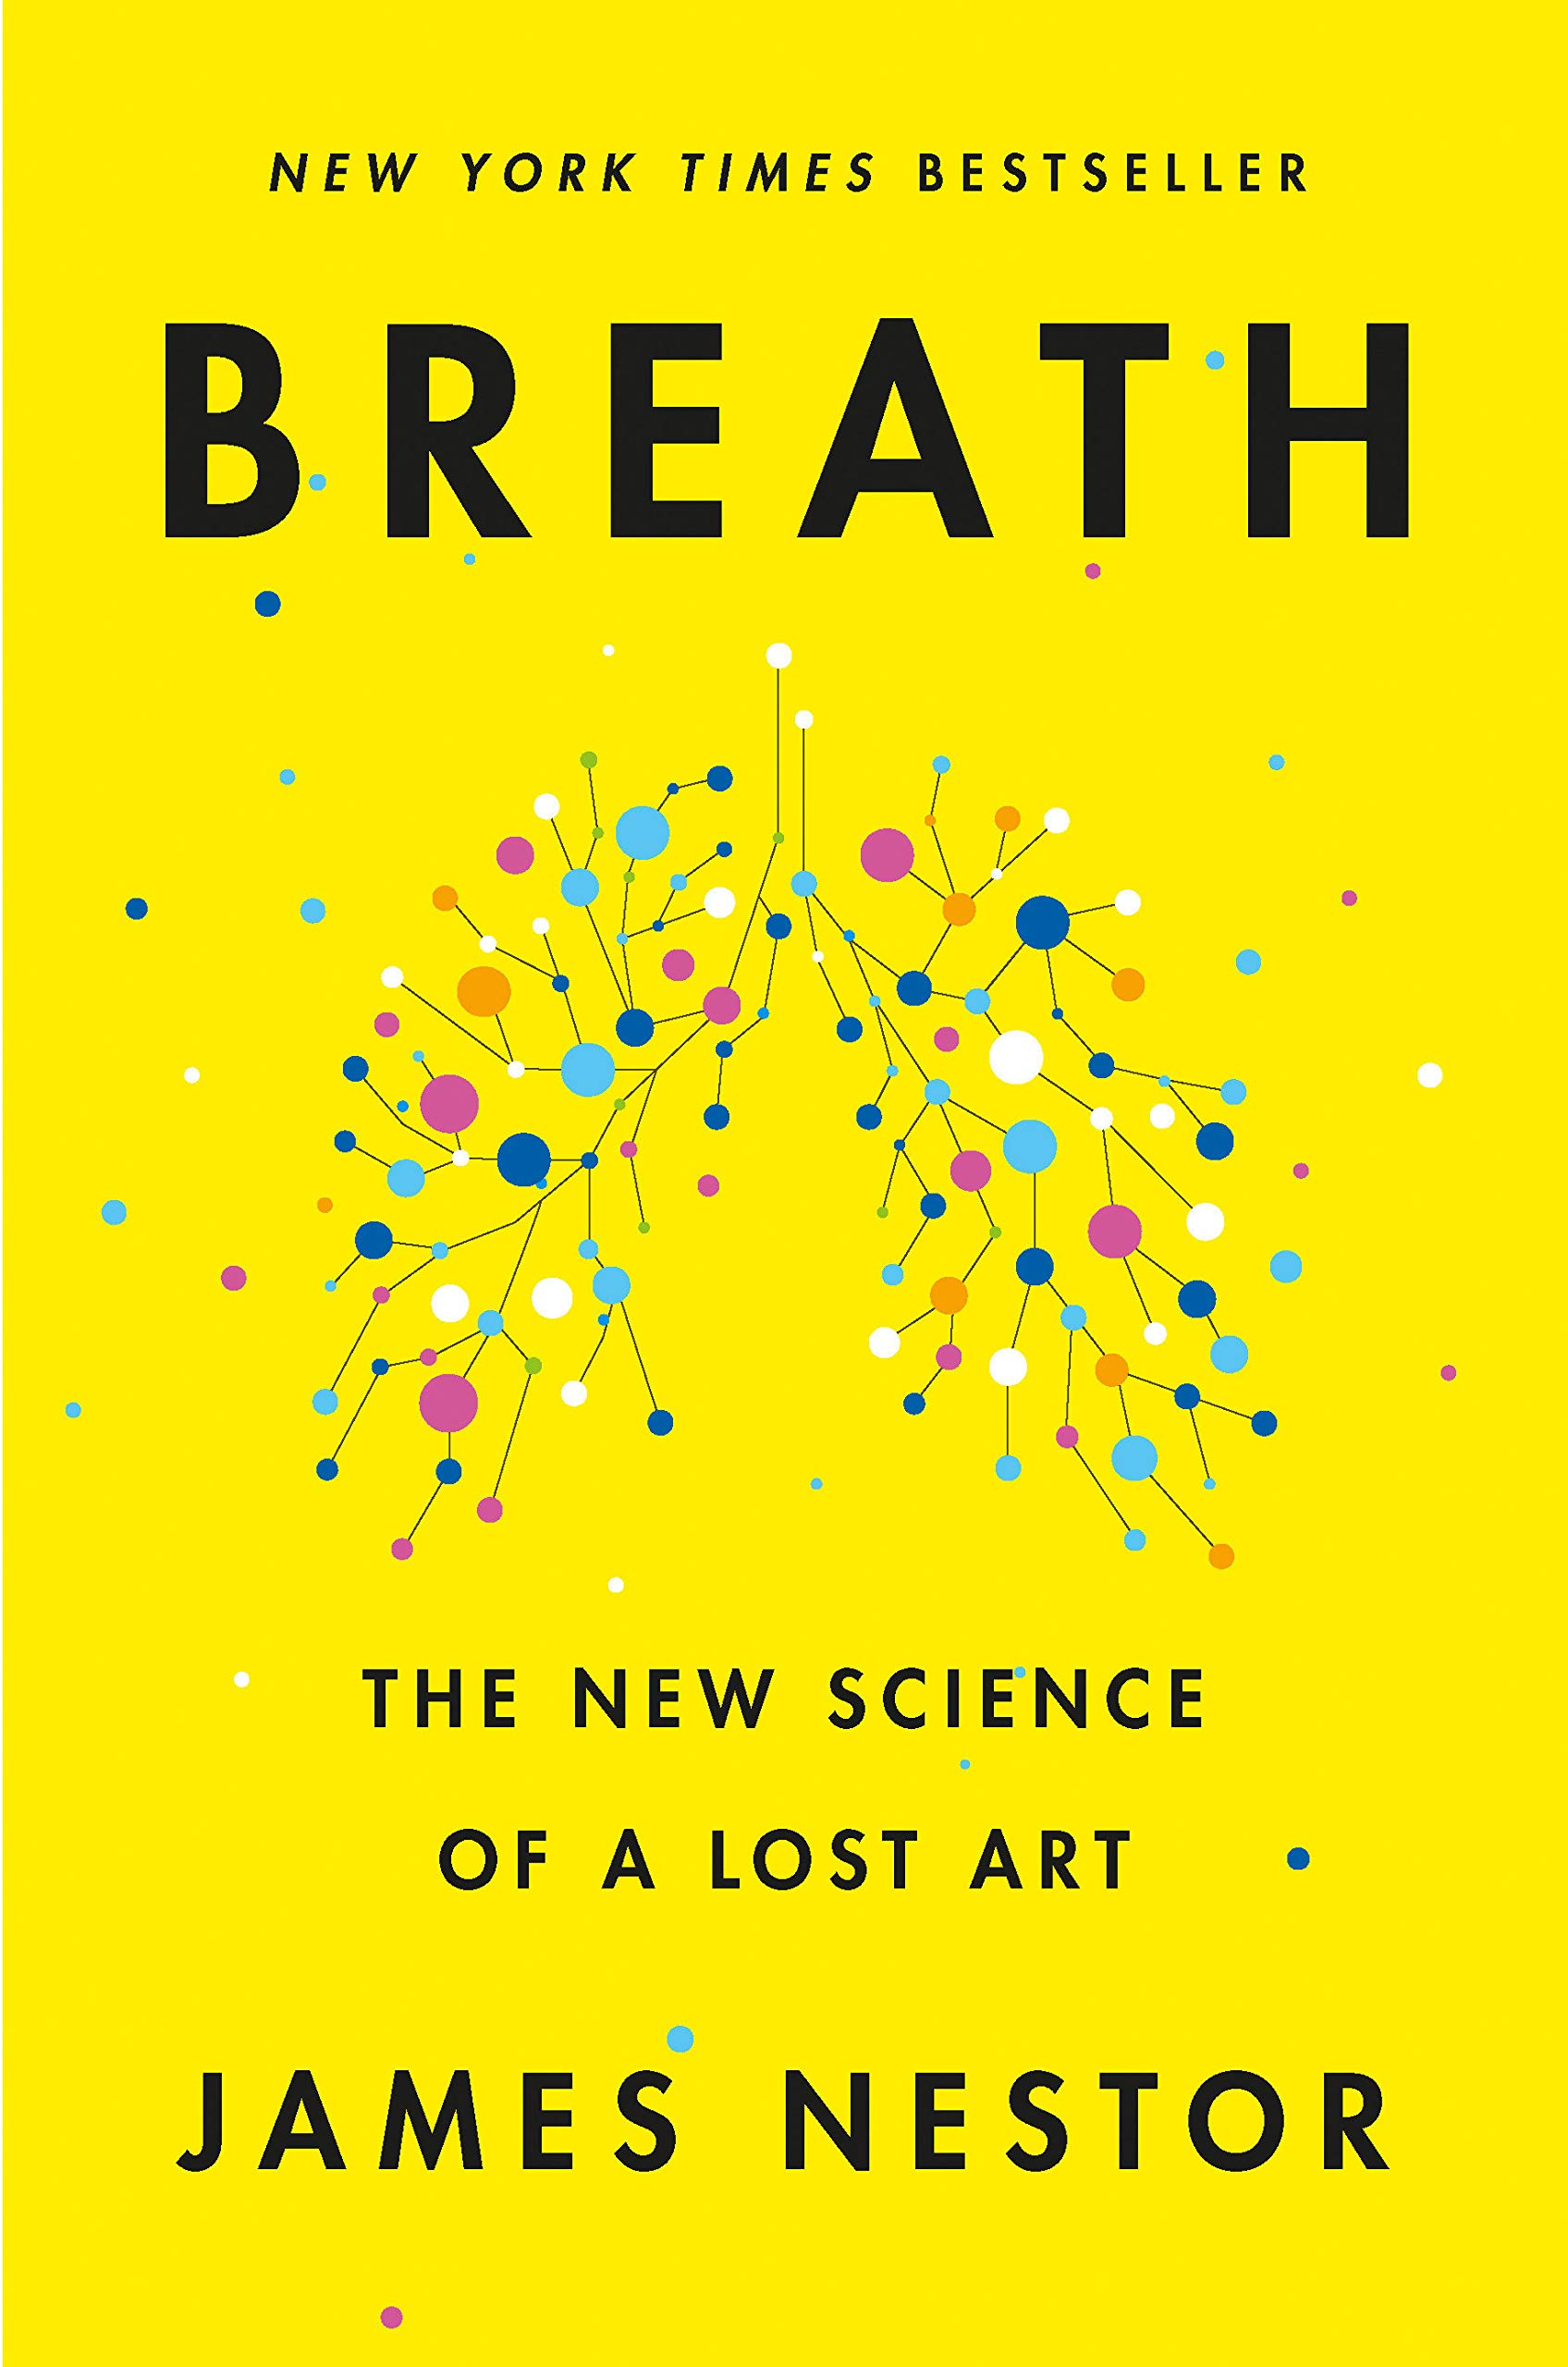 Cover of "Breath, The New Science of the Lost Art" by James Nestor 